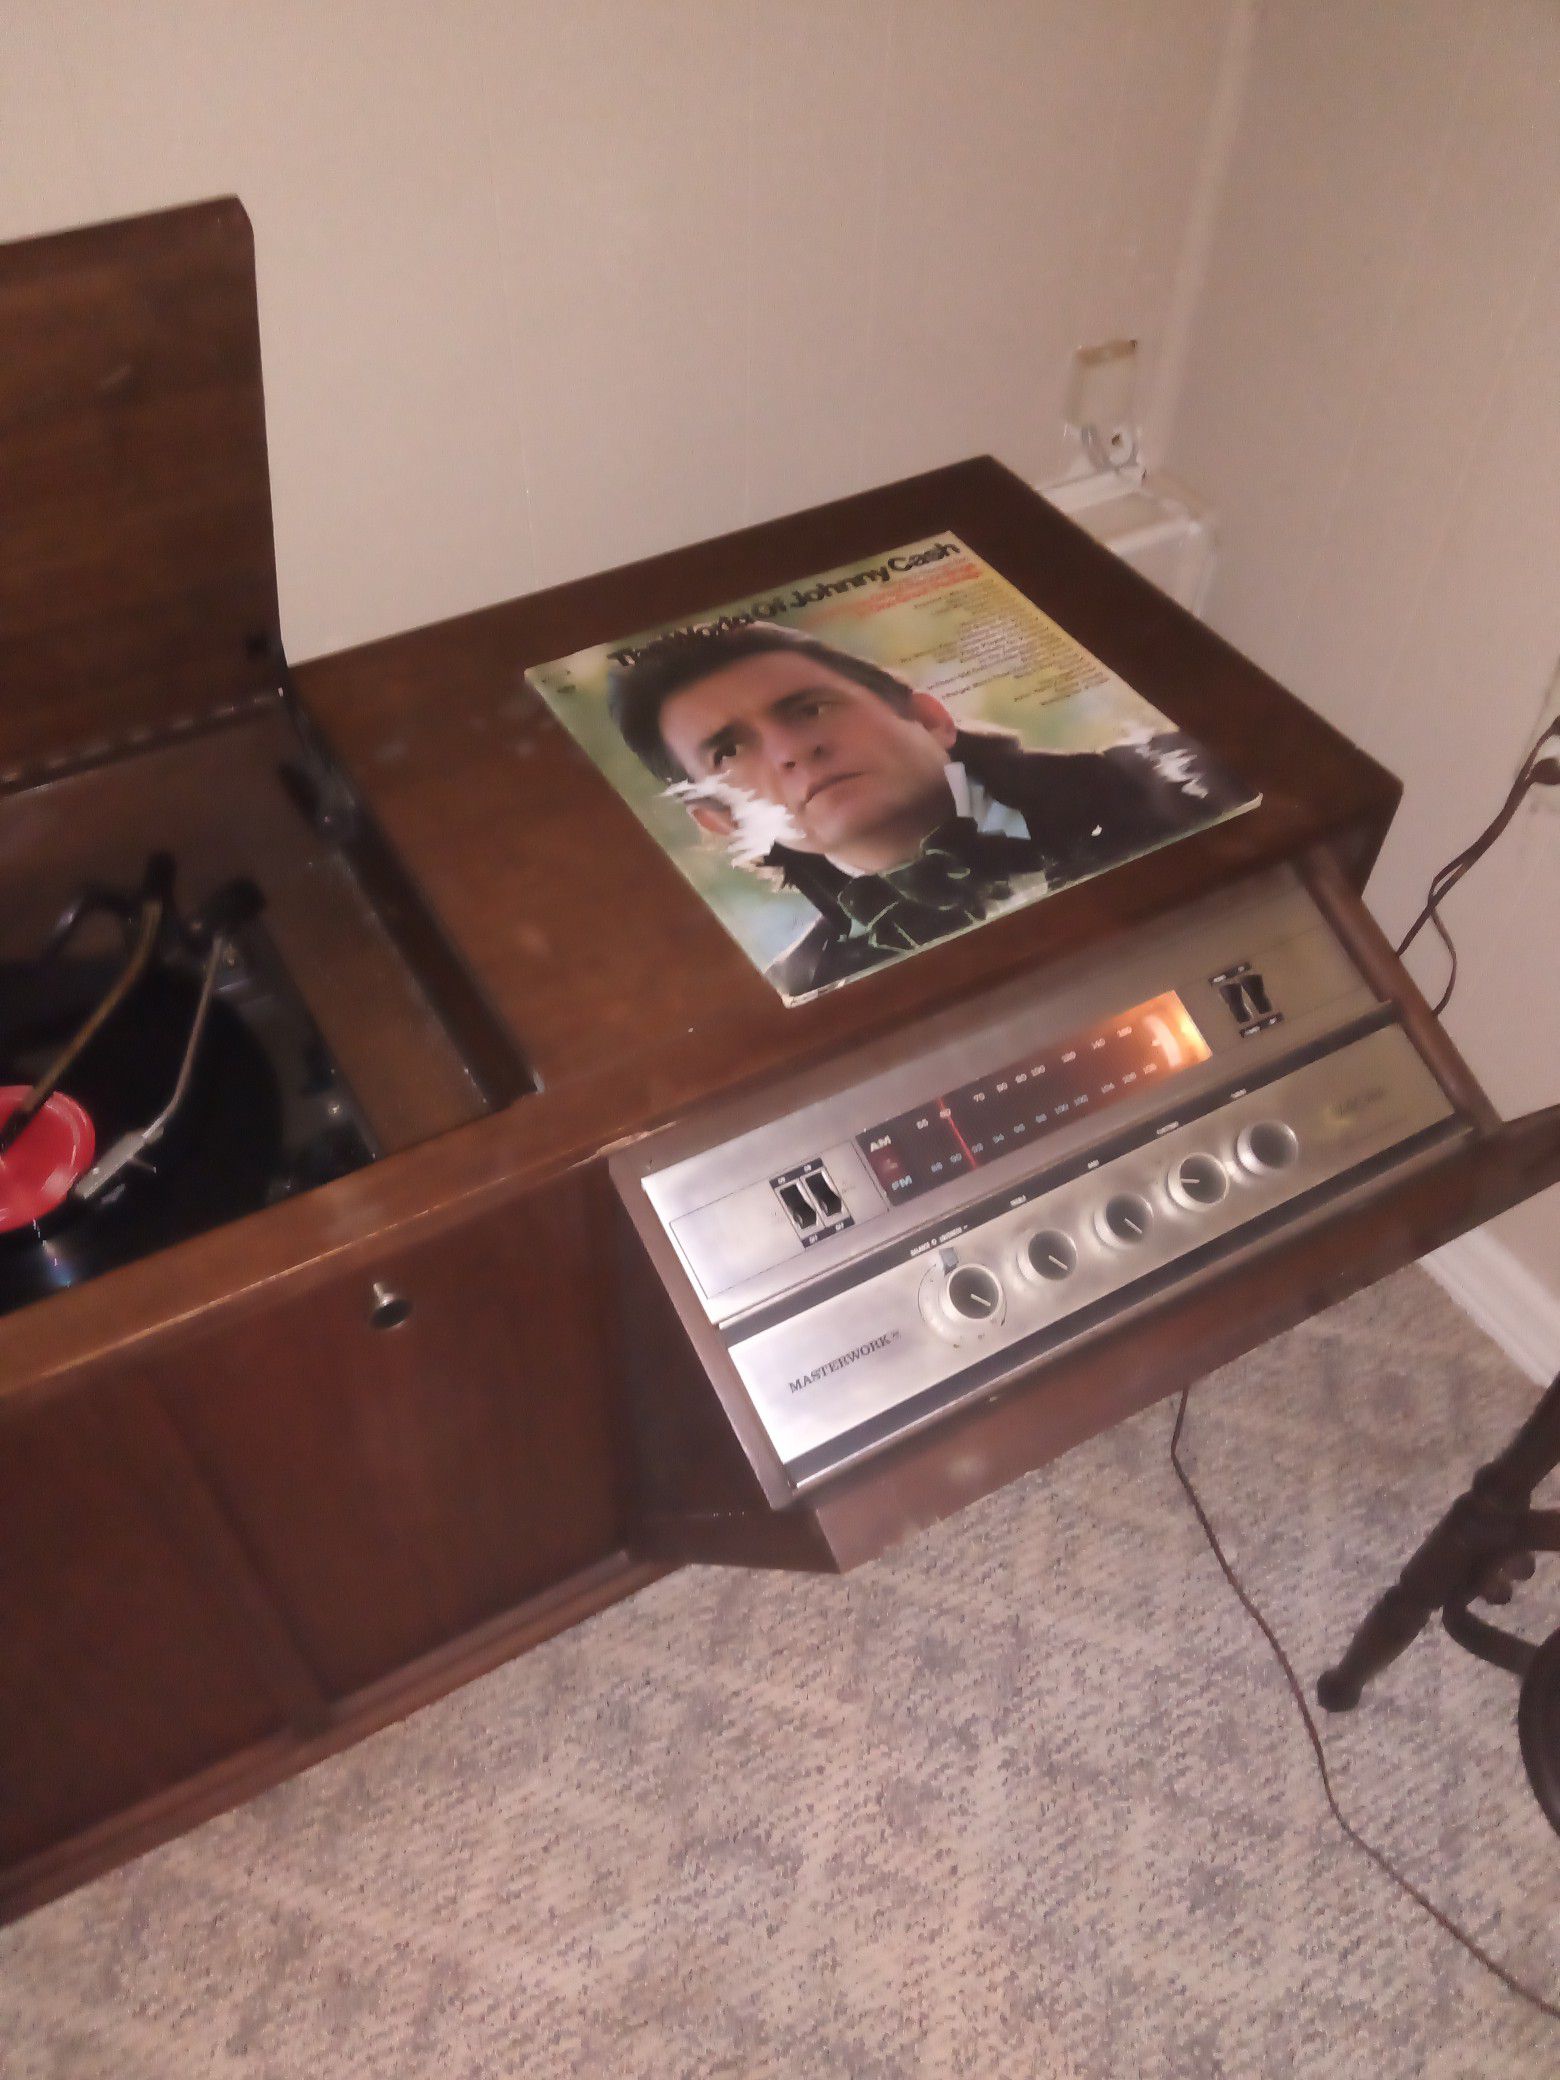 Record/radio receiver console with lots of records included